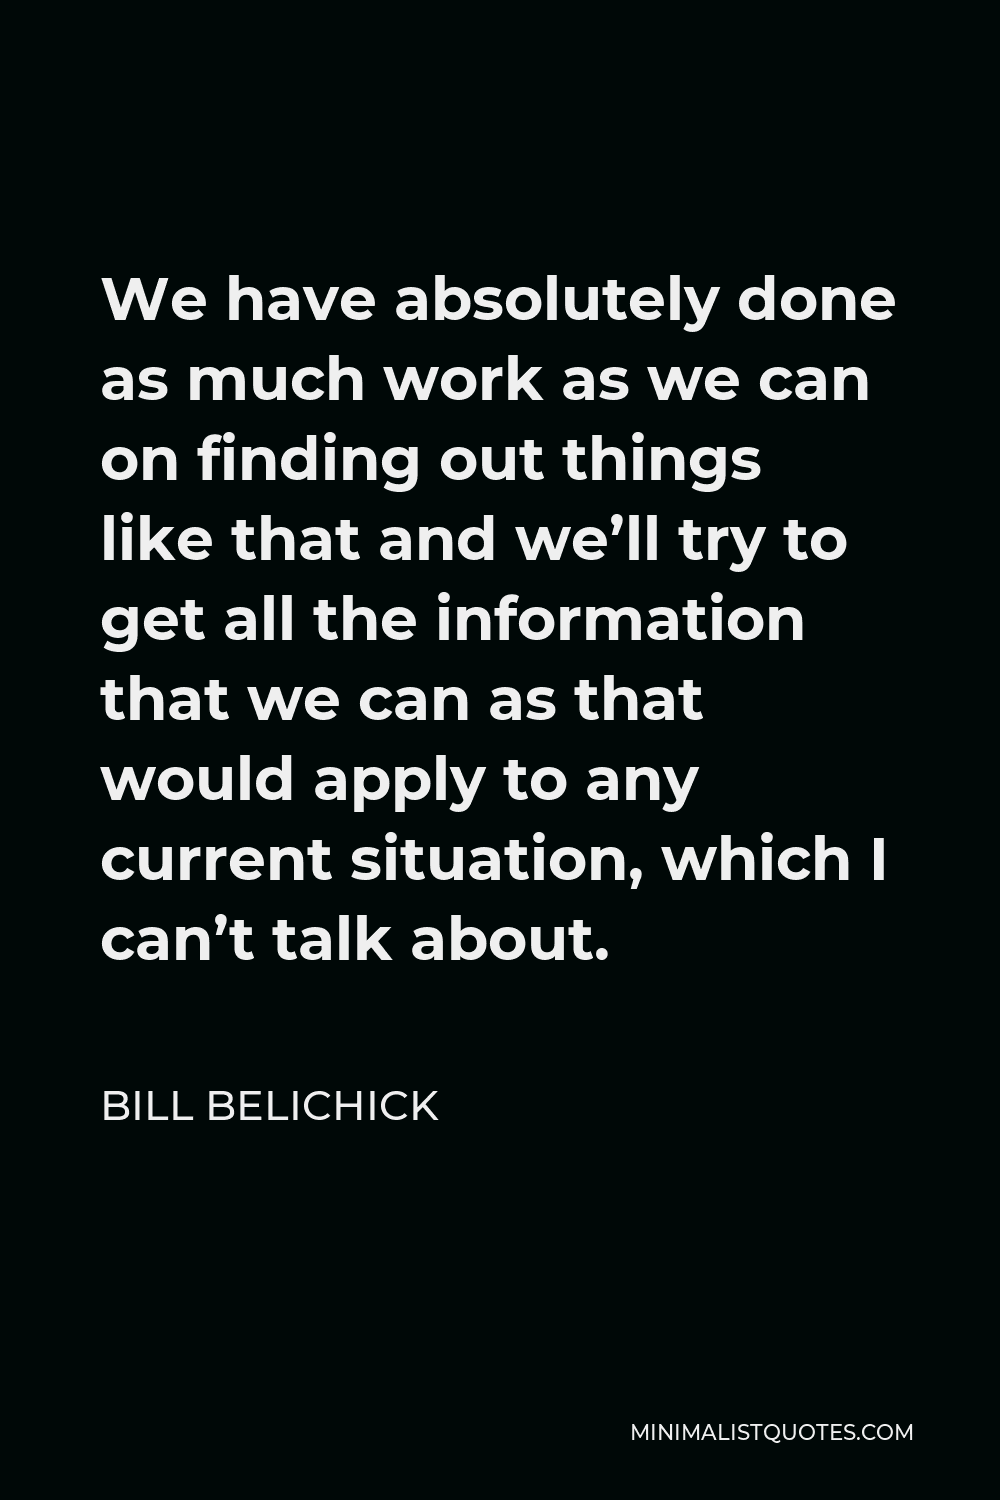 Bill Belichick Quote - We have absolutely done as much work as we can on finding out things like that and we’ll try to get all the information that we can as that would apply to any current situation, which I can’t talk about.